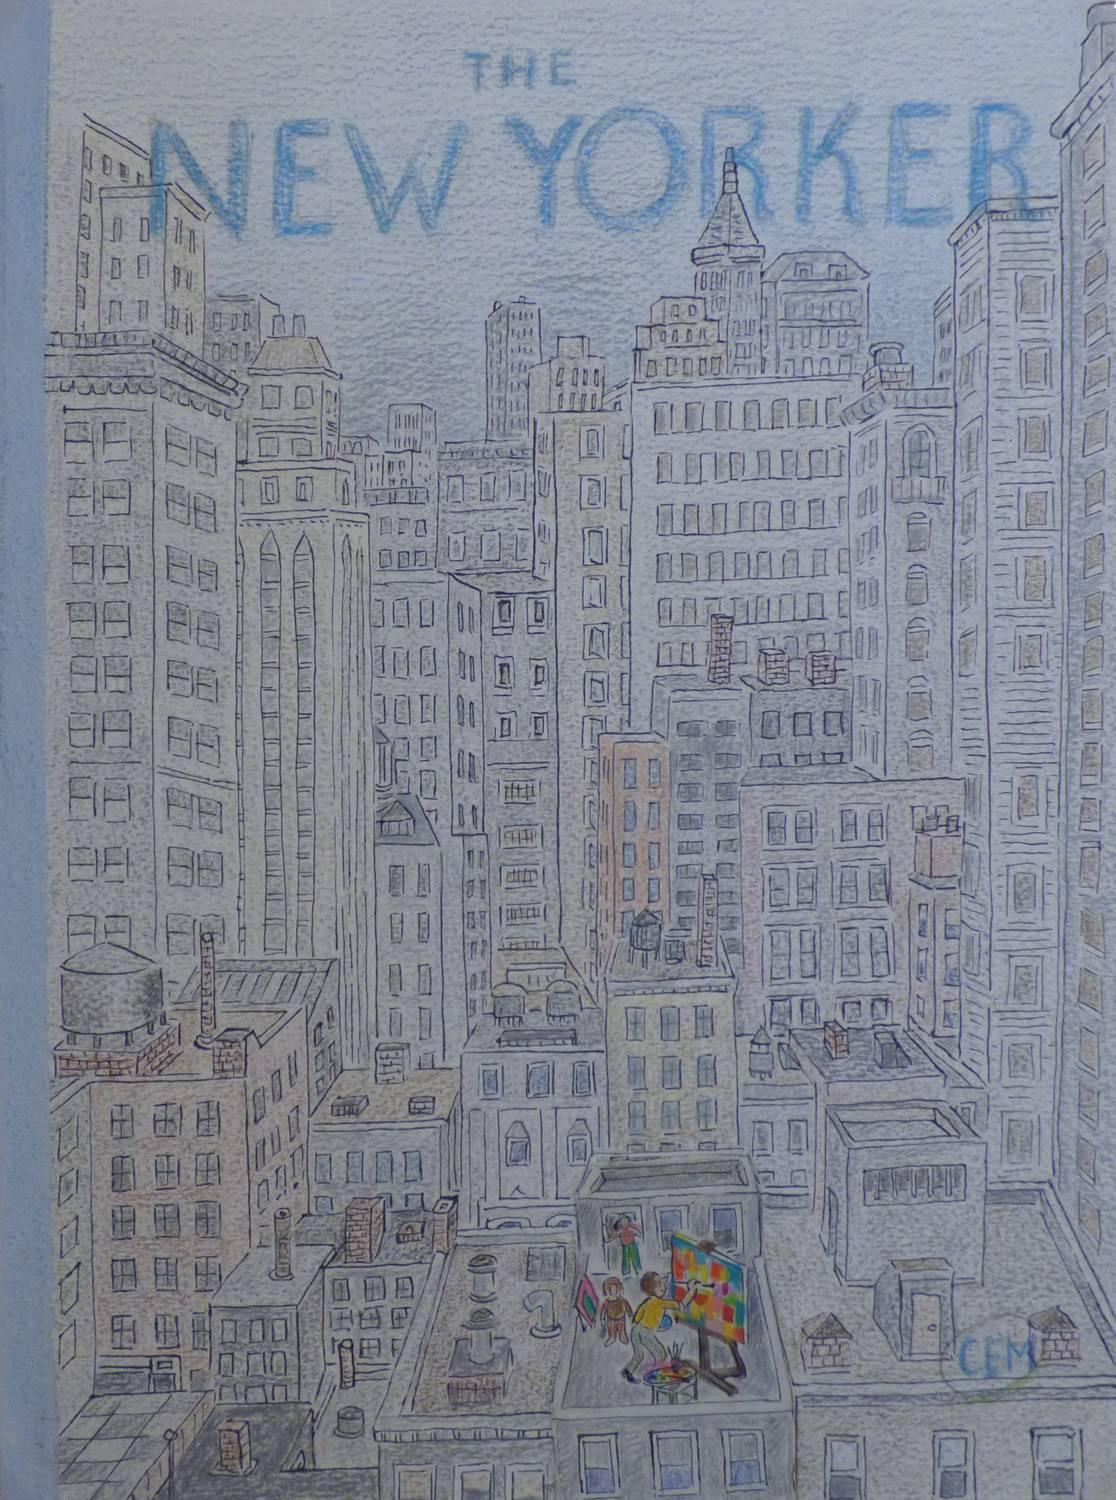 Charles Martin Landscape Painting - New Yorker Cover, Roof-Top Painter